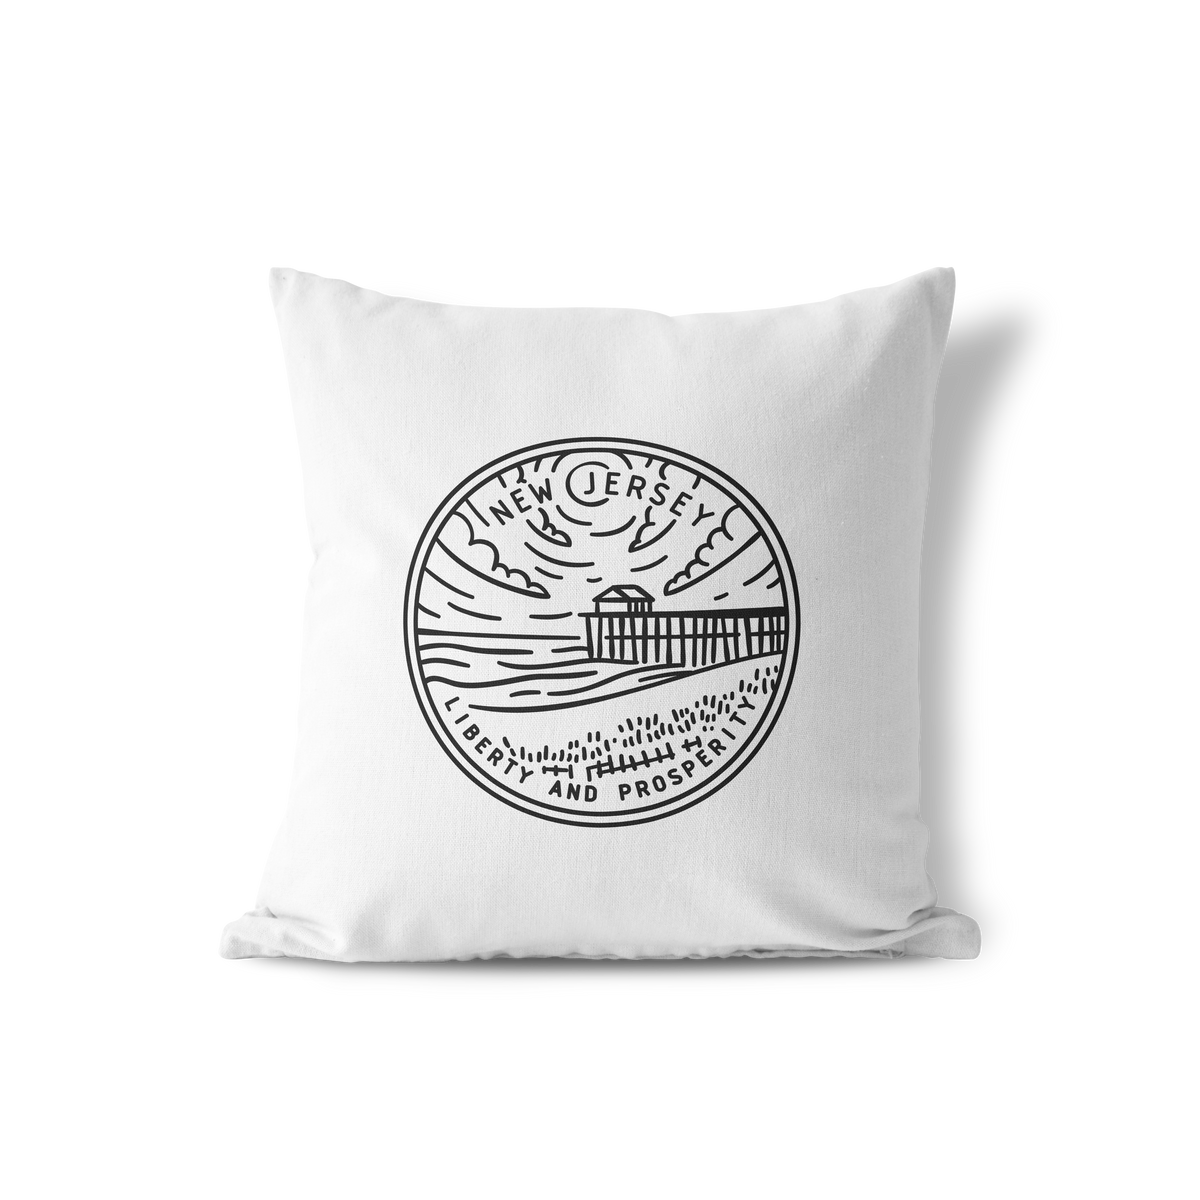 New Jersey State Crest Throw Pillow